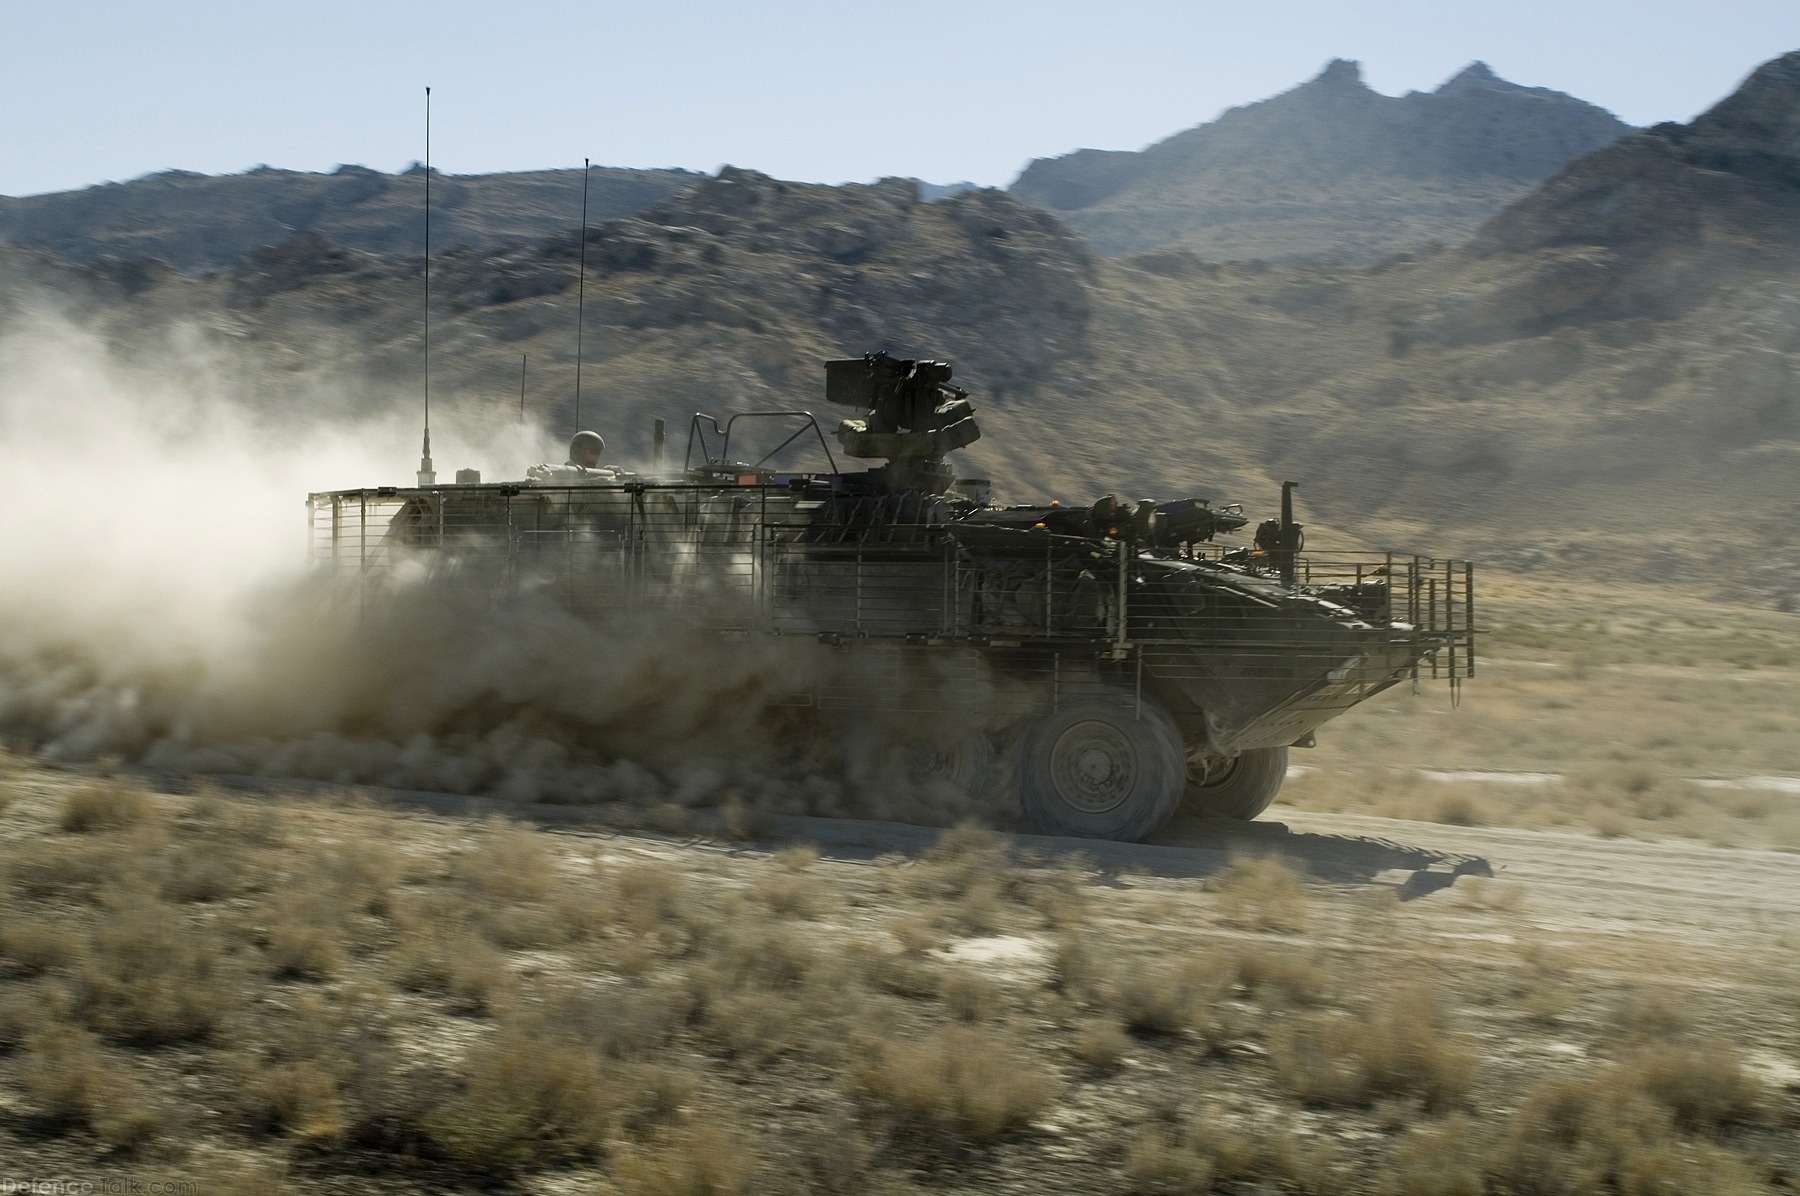 US Army Stryker Nuclear, Biological and Chemical Reconnaissance Vehicle